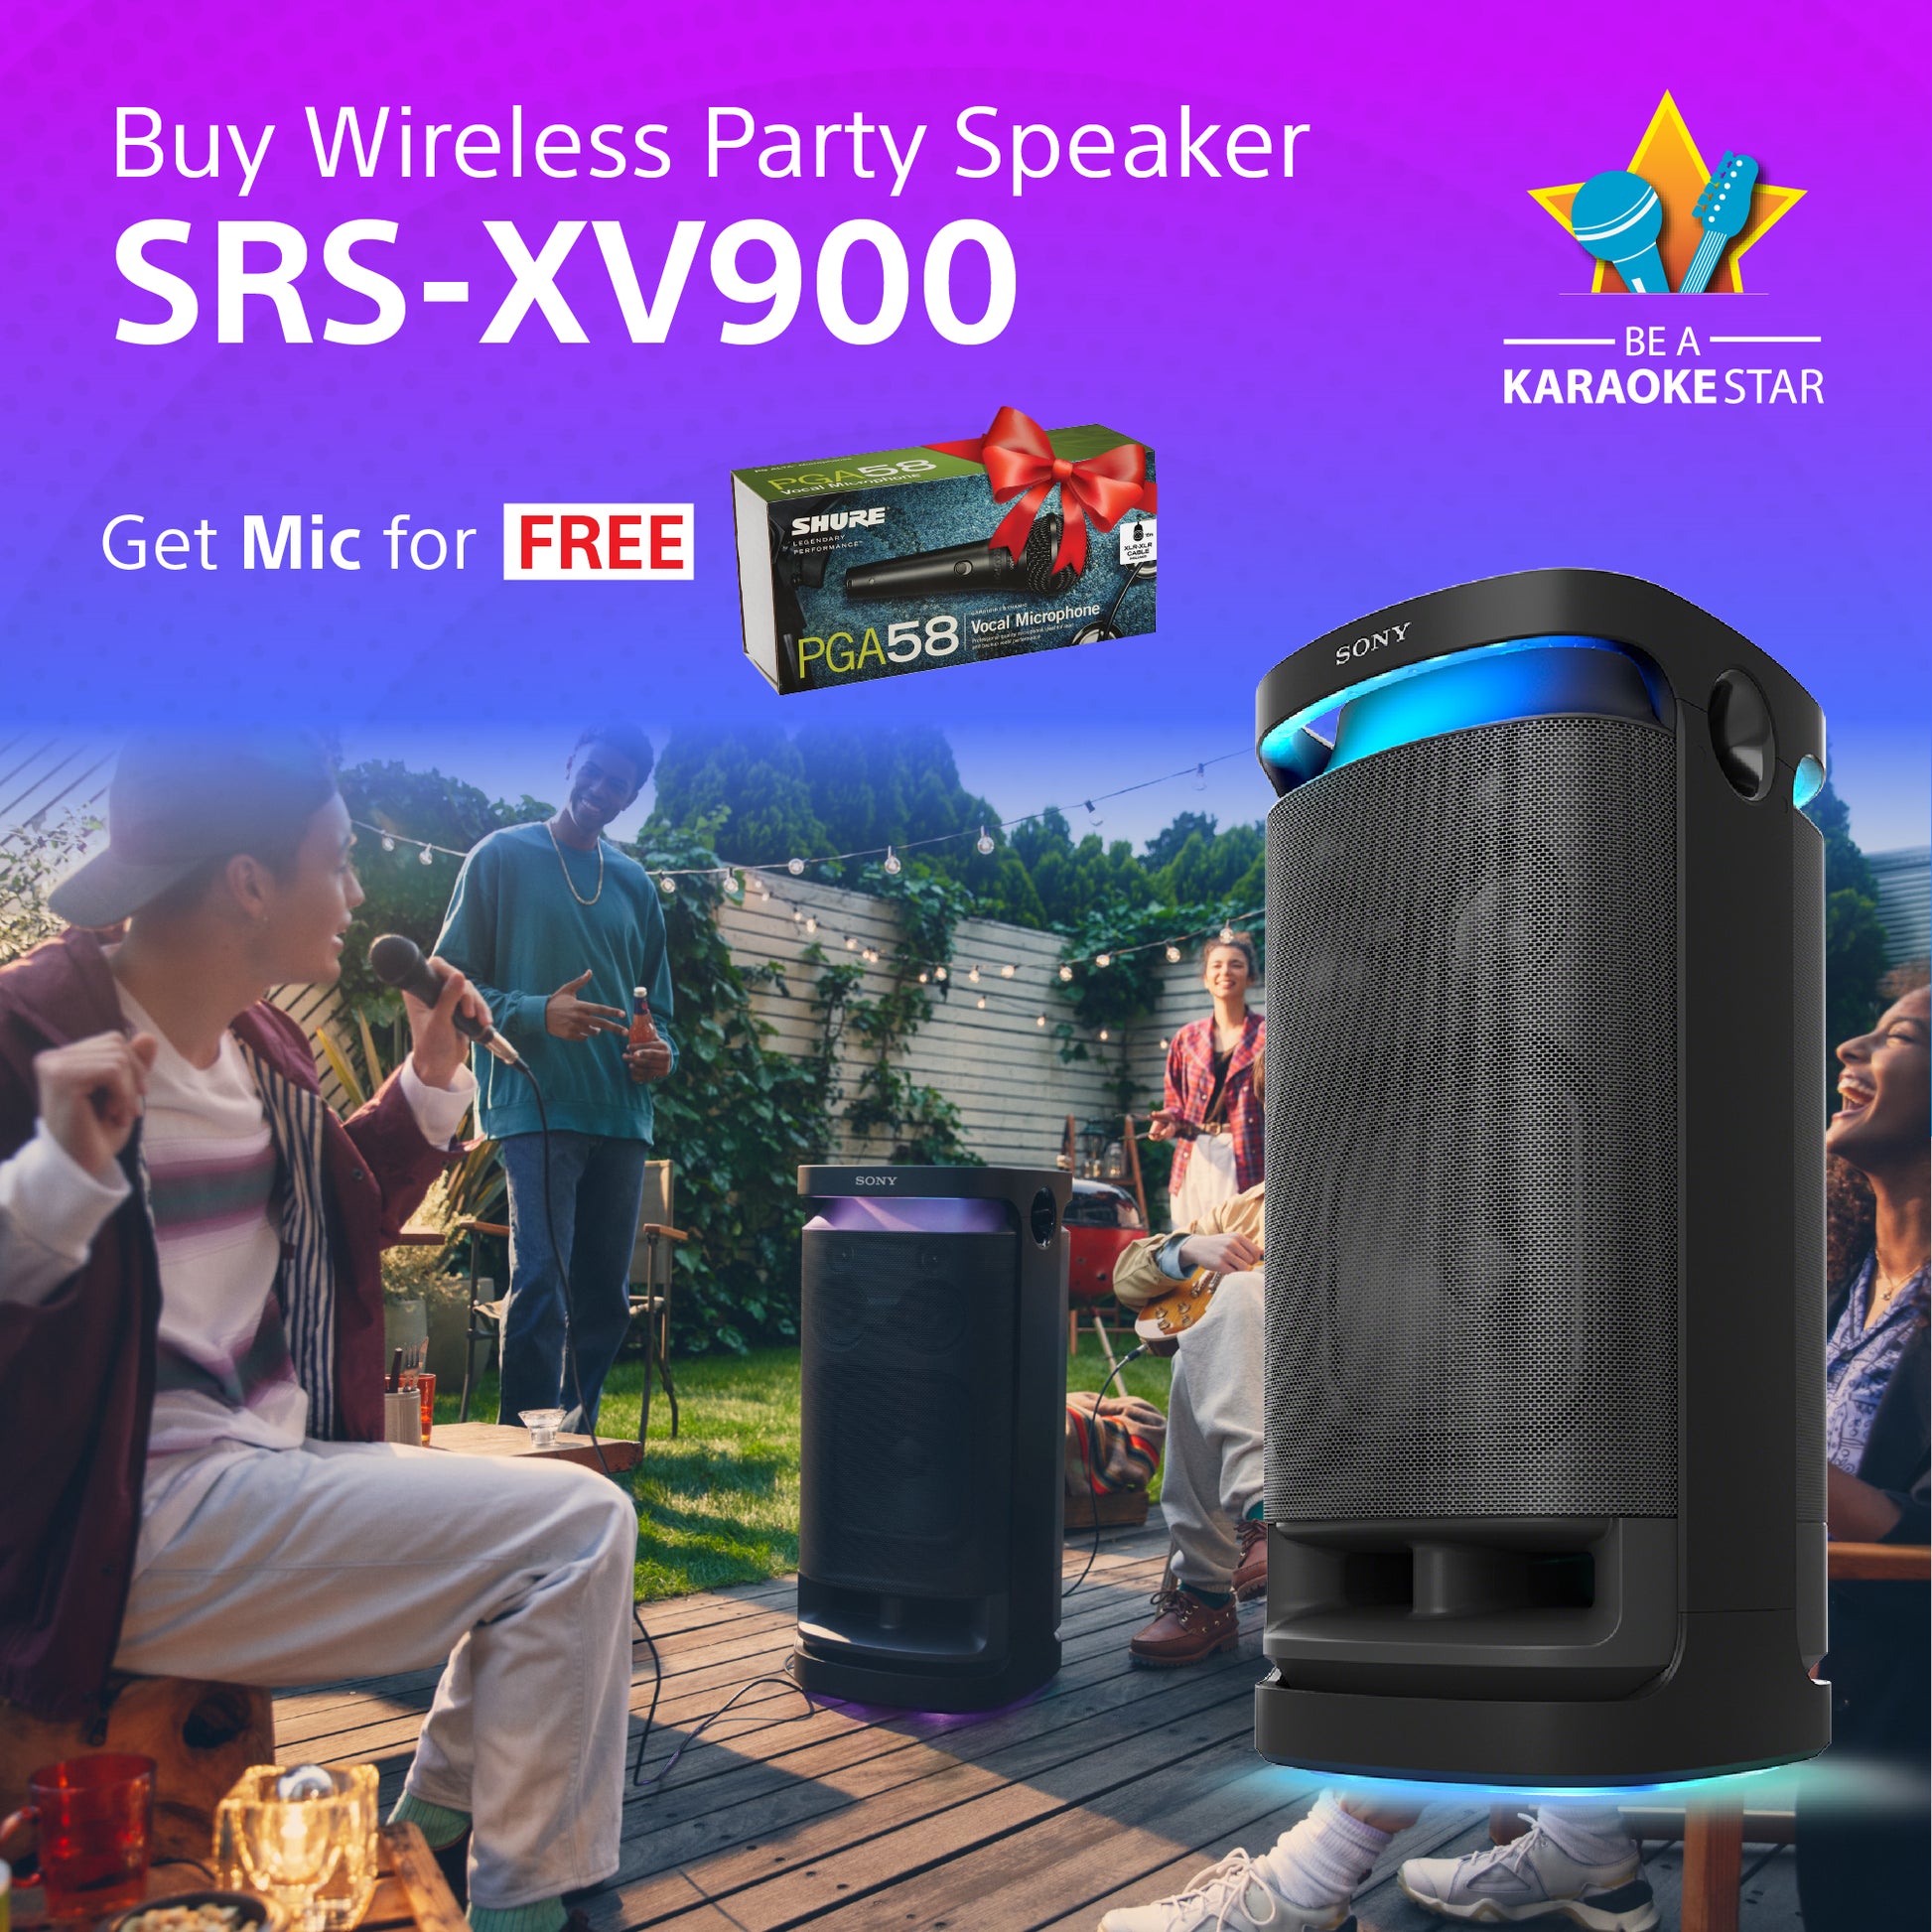 Sony SRS-XV900 Bluetooth High Power Wireless Speakers With 25 Hours Battery Life and Get Free Mic